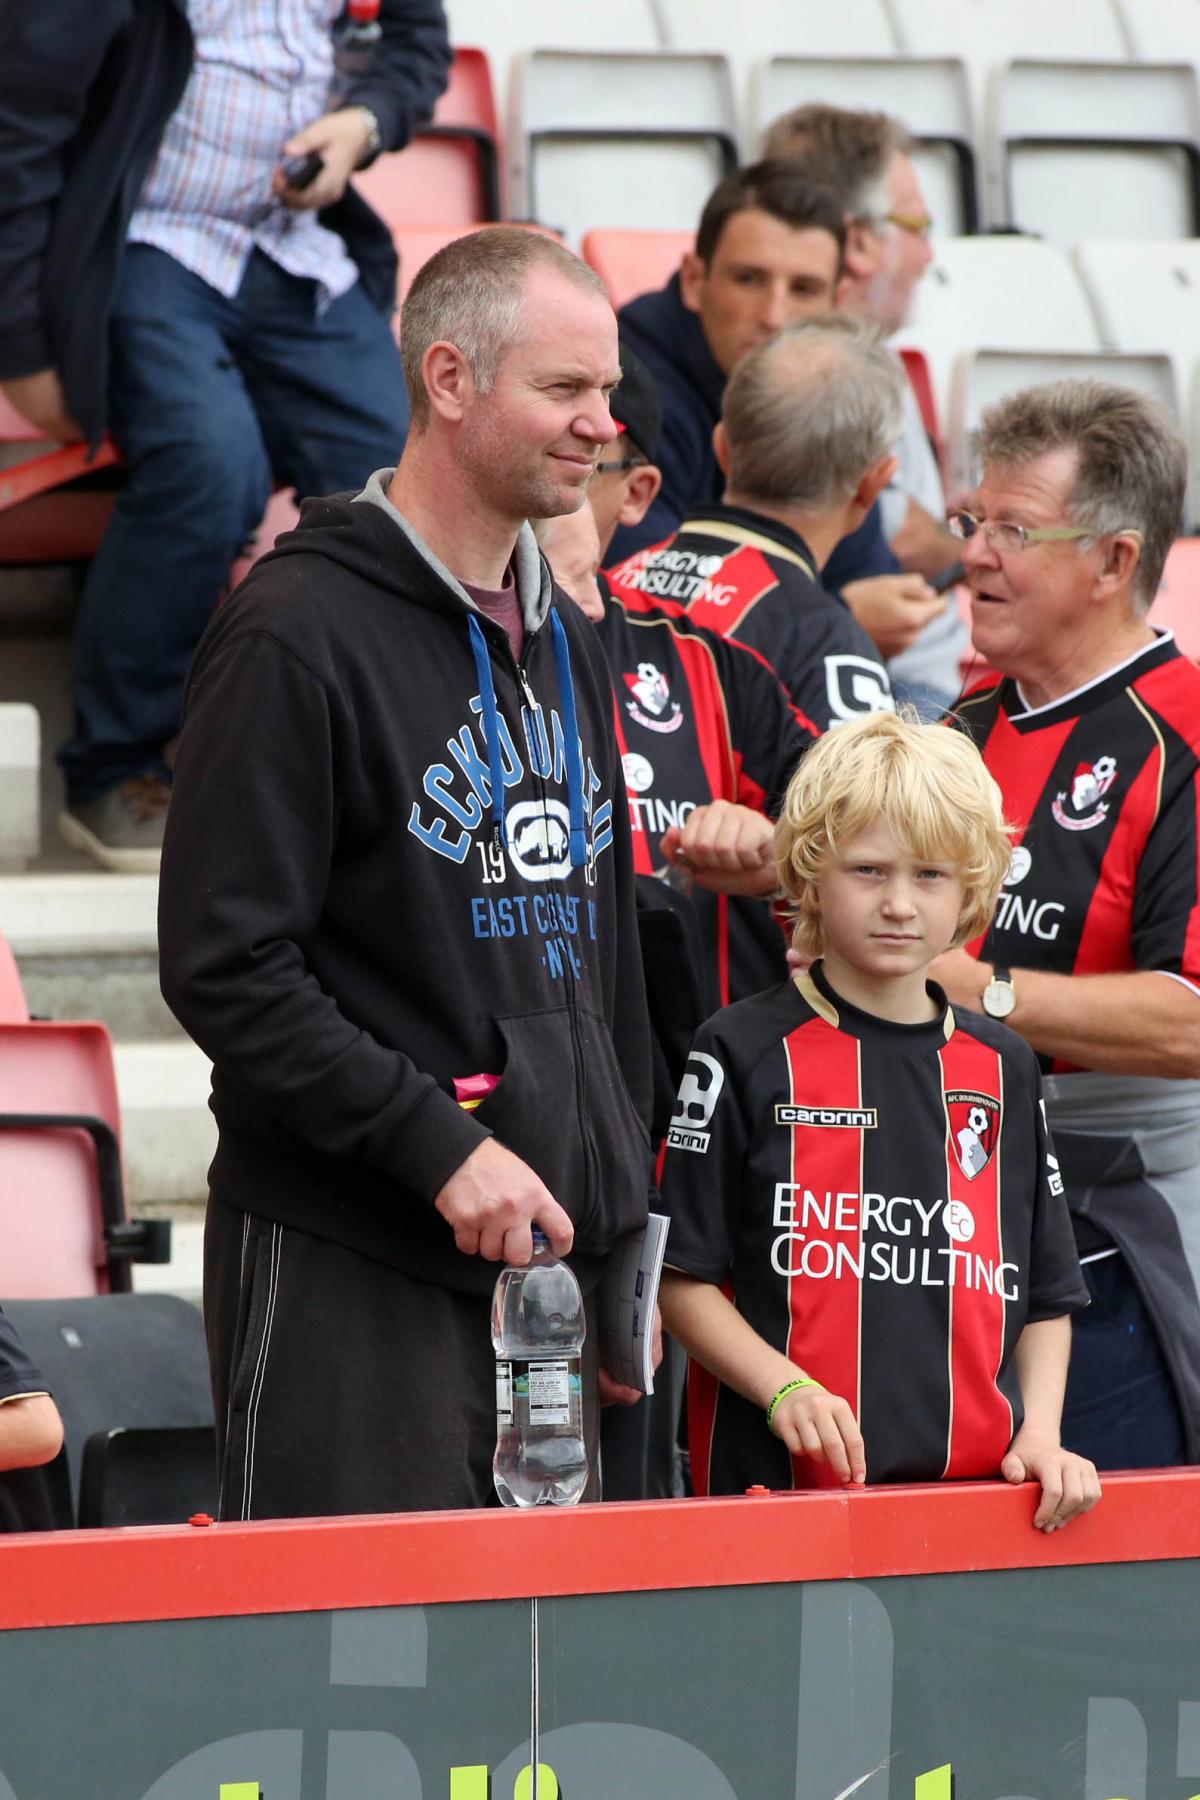 All our pictures of AFC Bournemouth v Rotherham at the Goldsands Stadium on Saturday, September 13, 2014